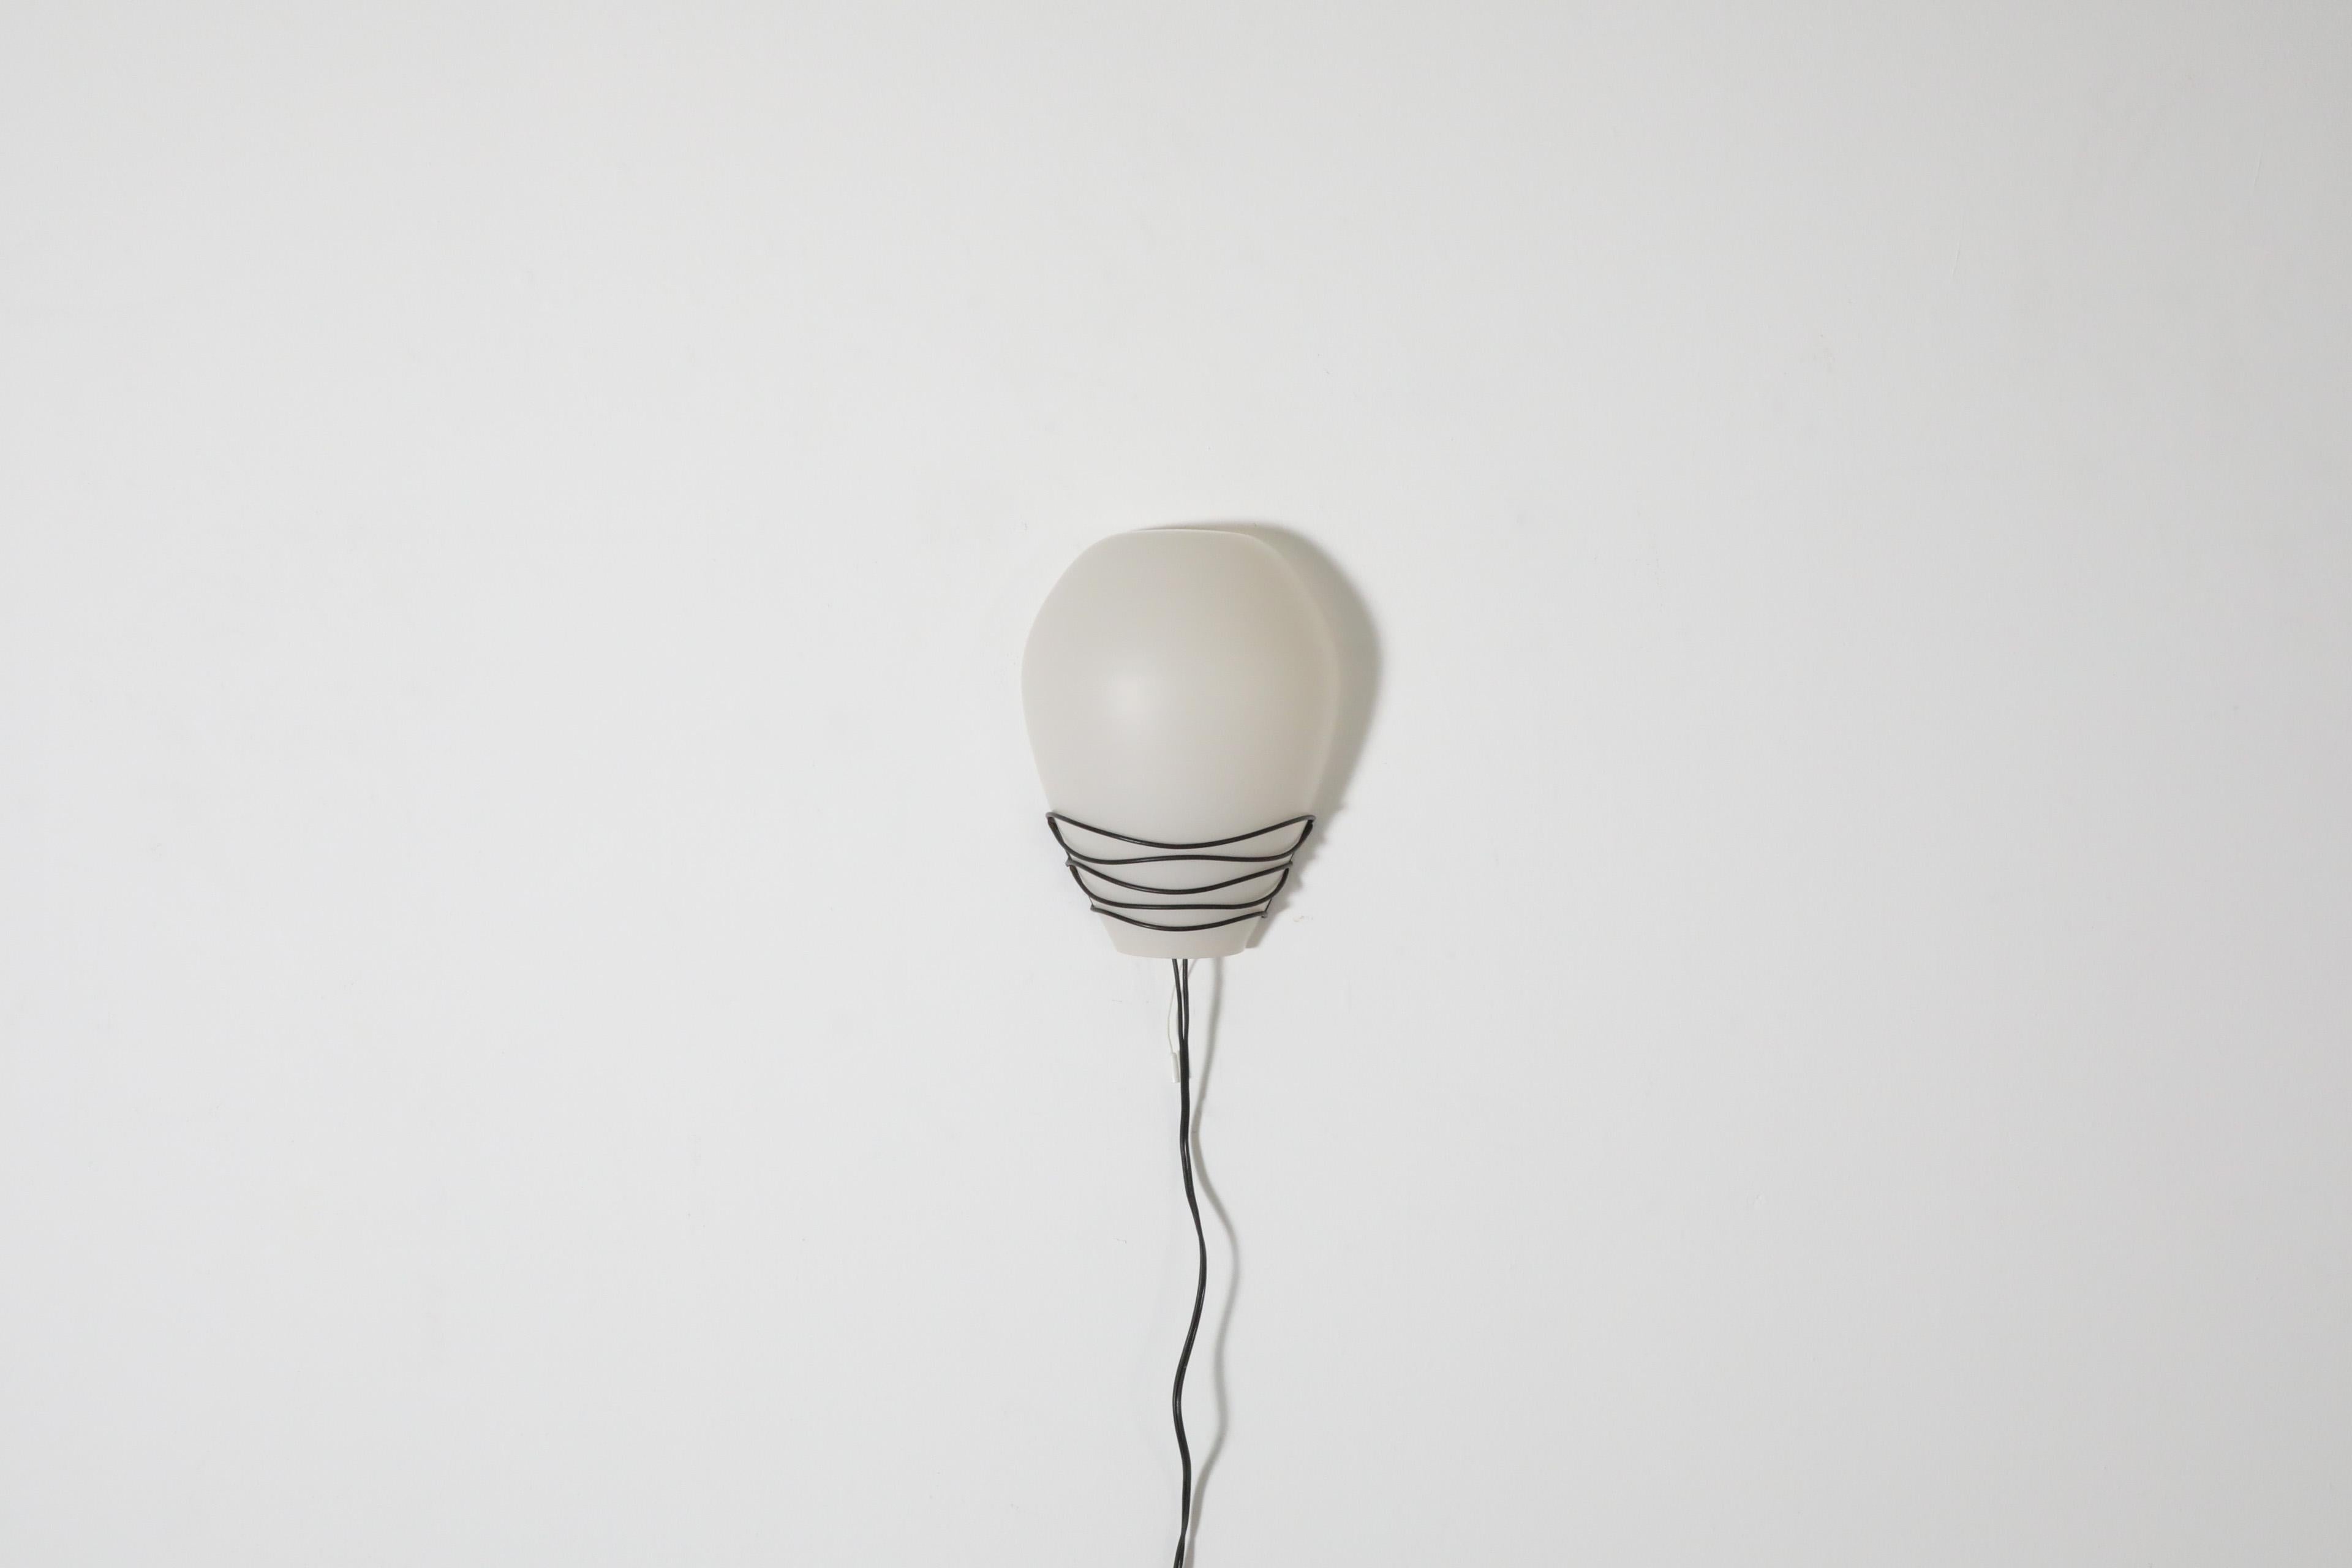 Philips Milk Glass Wall Sconce w/ Black Wire Mount and Milk Glass Shade, 1950's In Good Condition For Sale In Los Angeles, CA